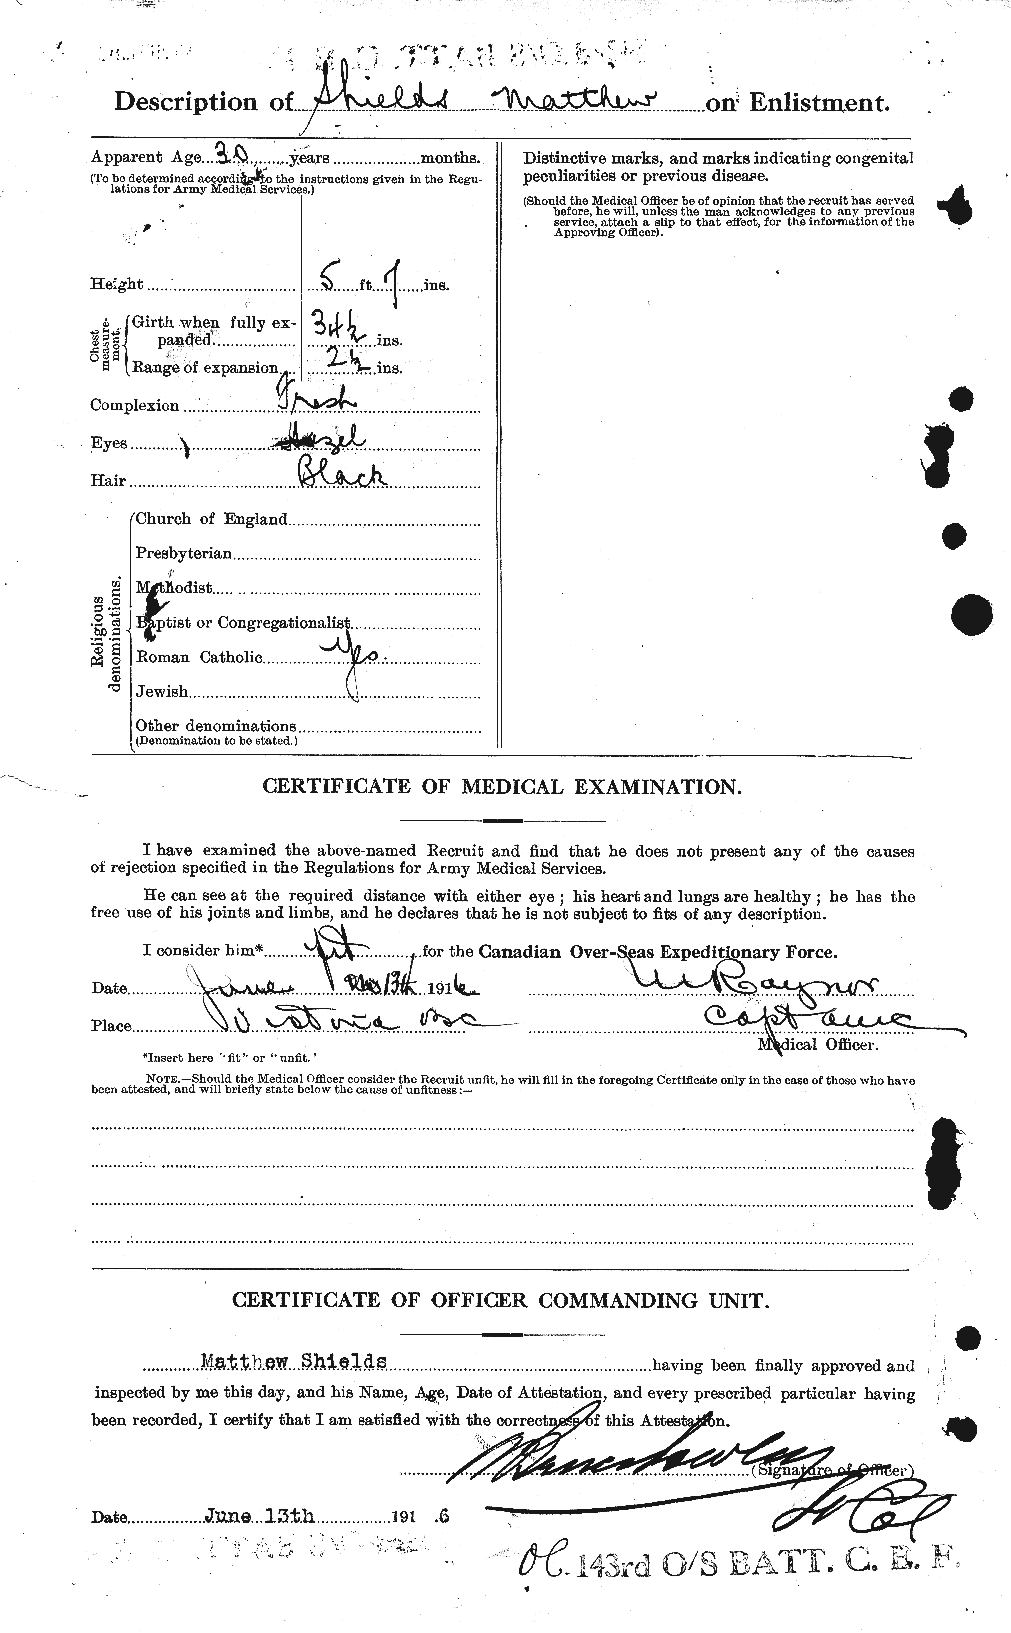 Personnel Records of the First World War - CEF 097025b